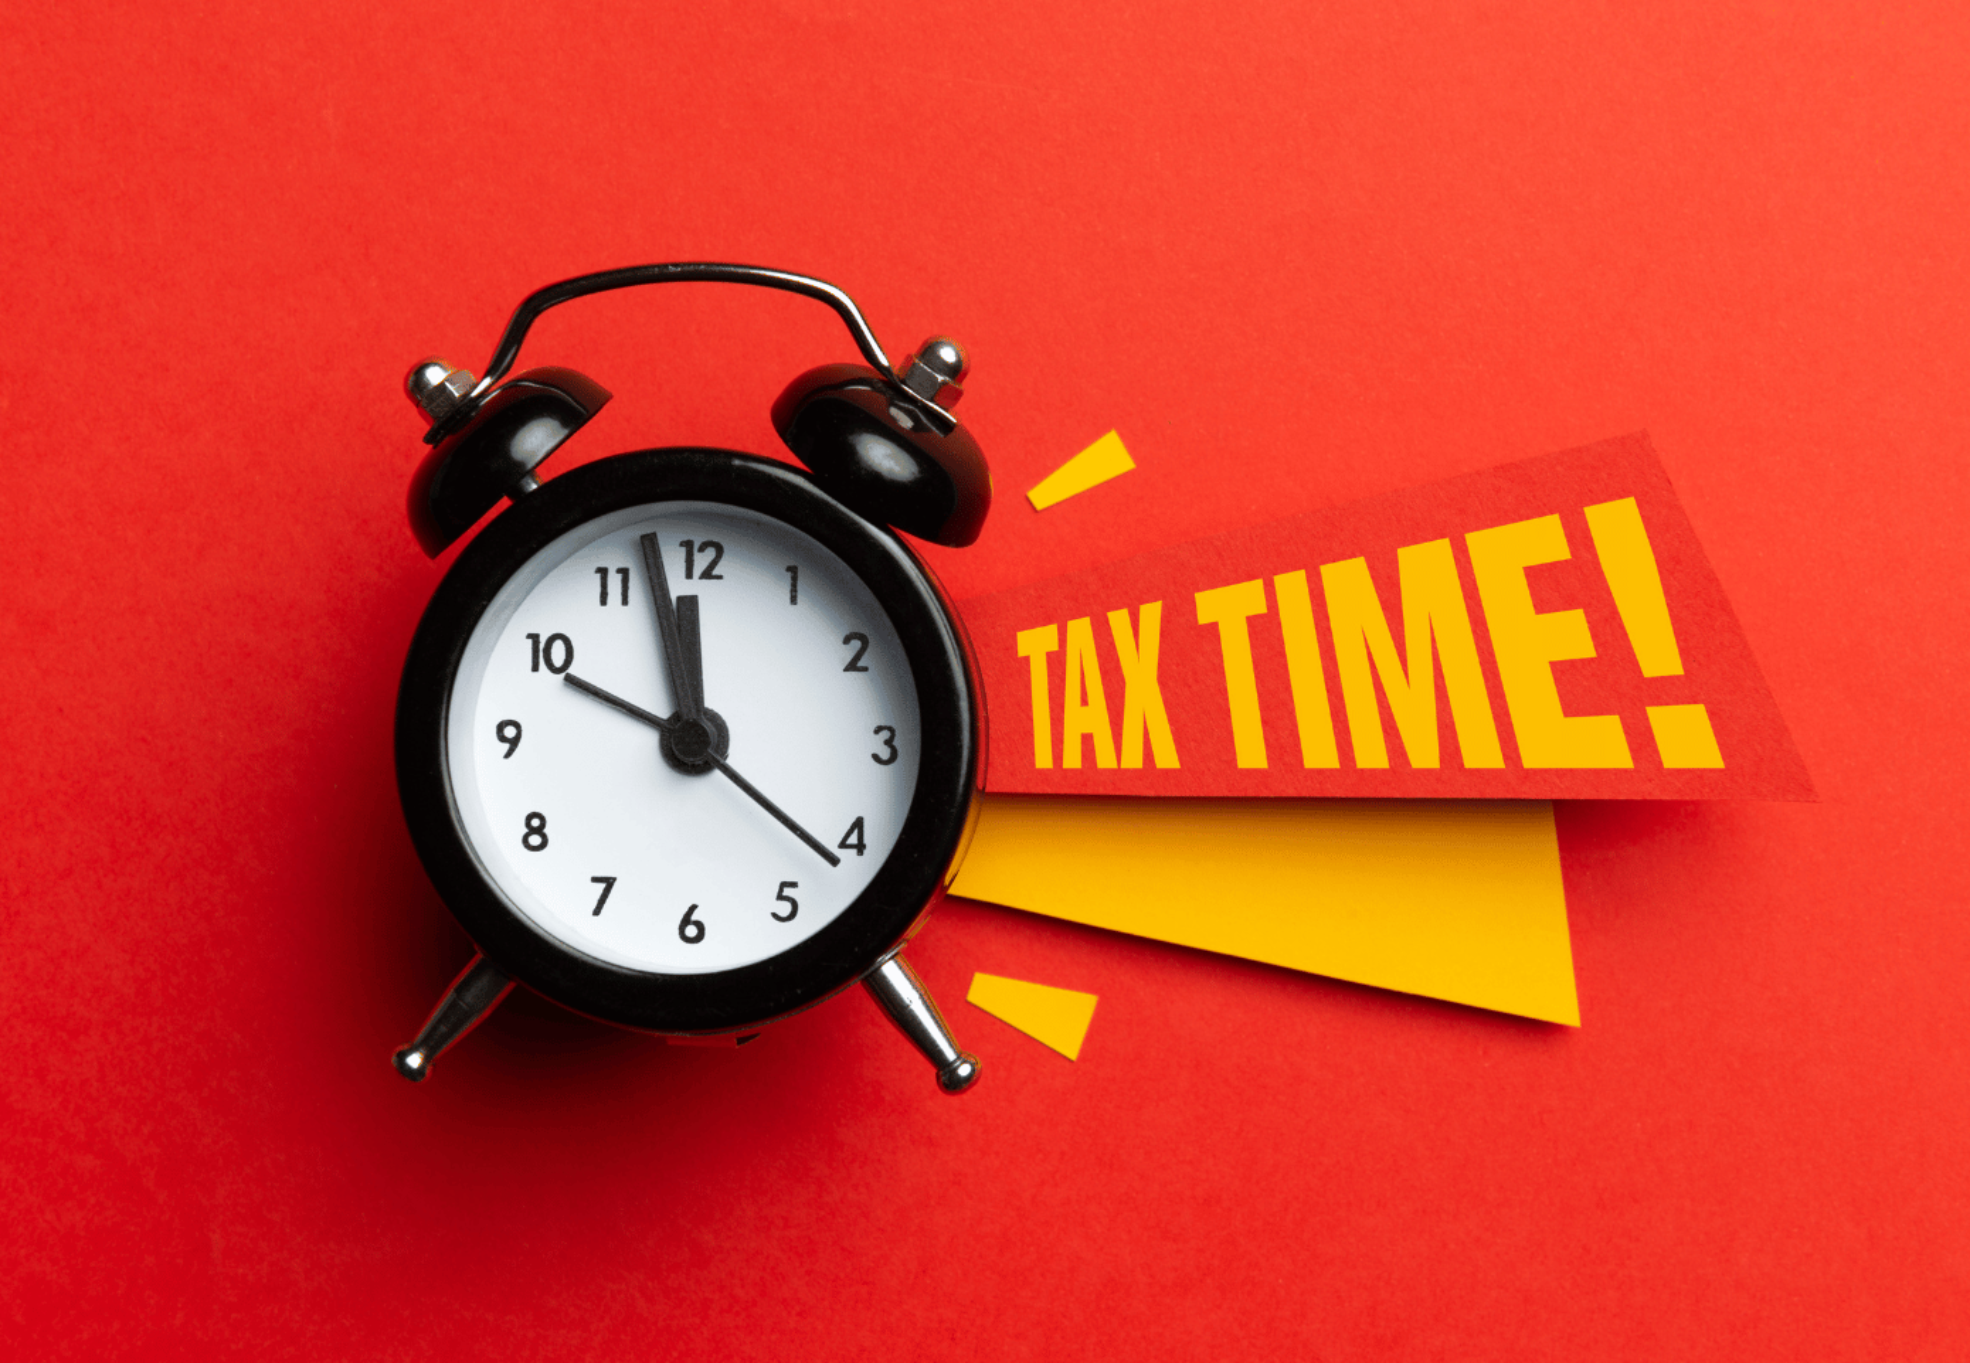 Benefits of filing taxes OR Why should I file taxes?